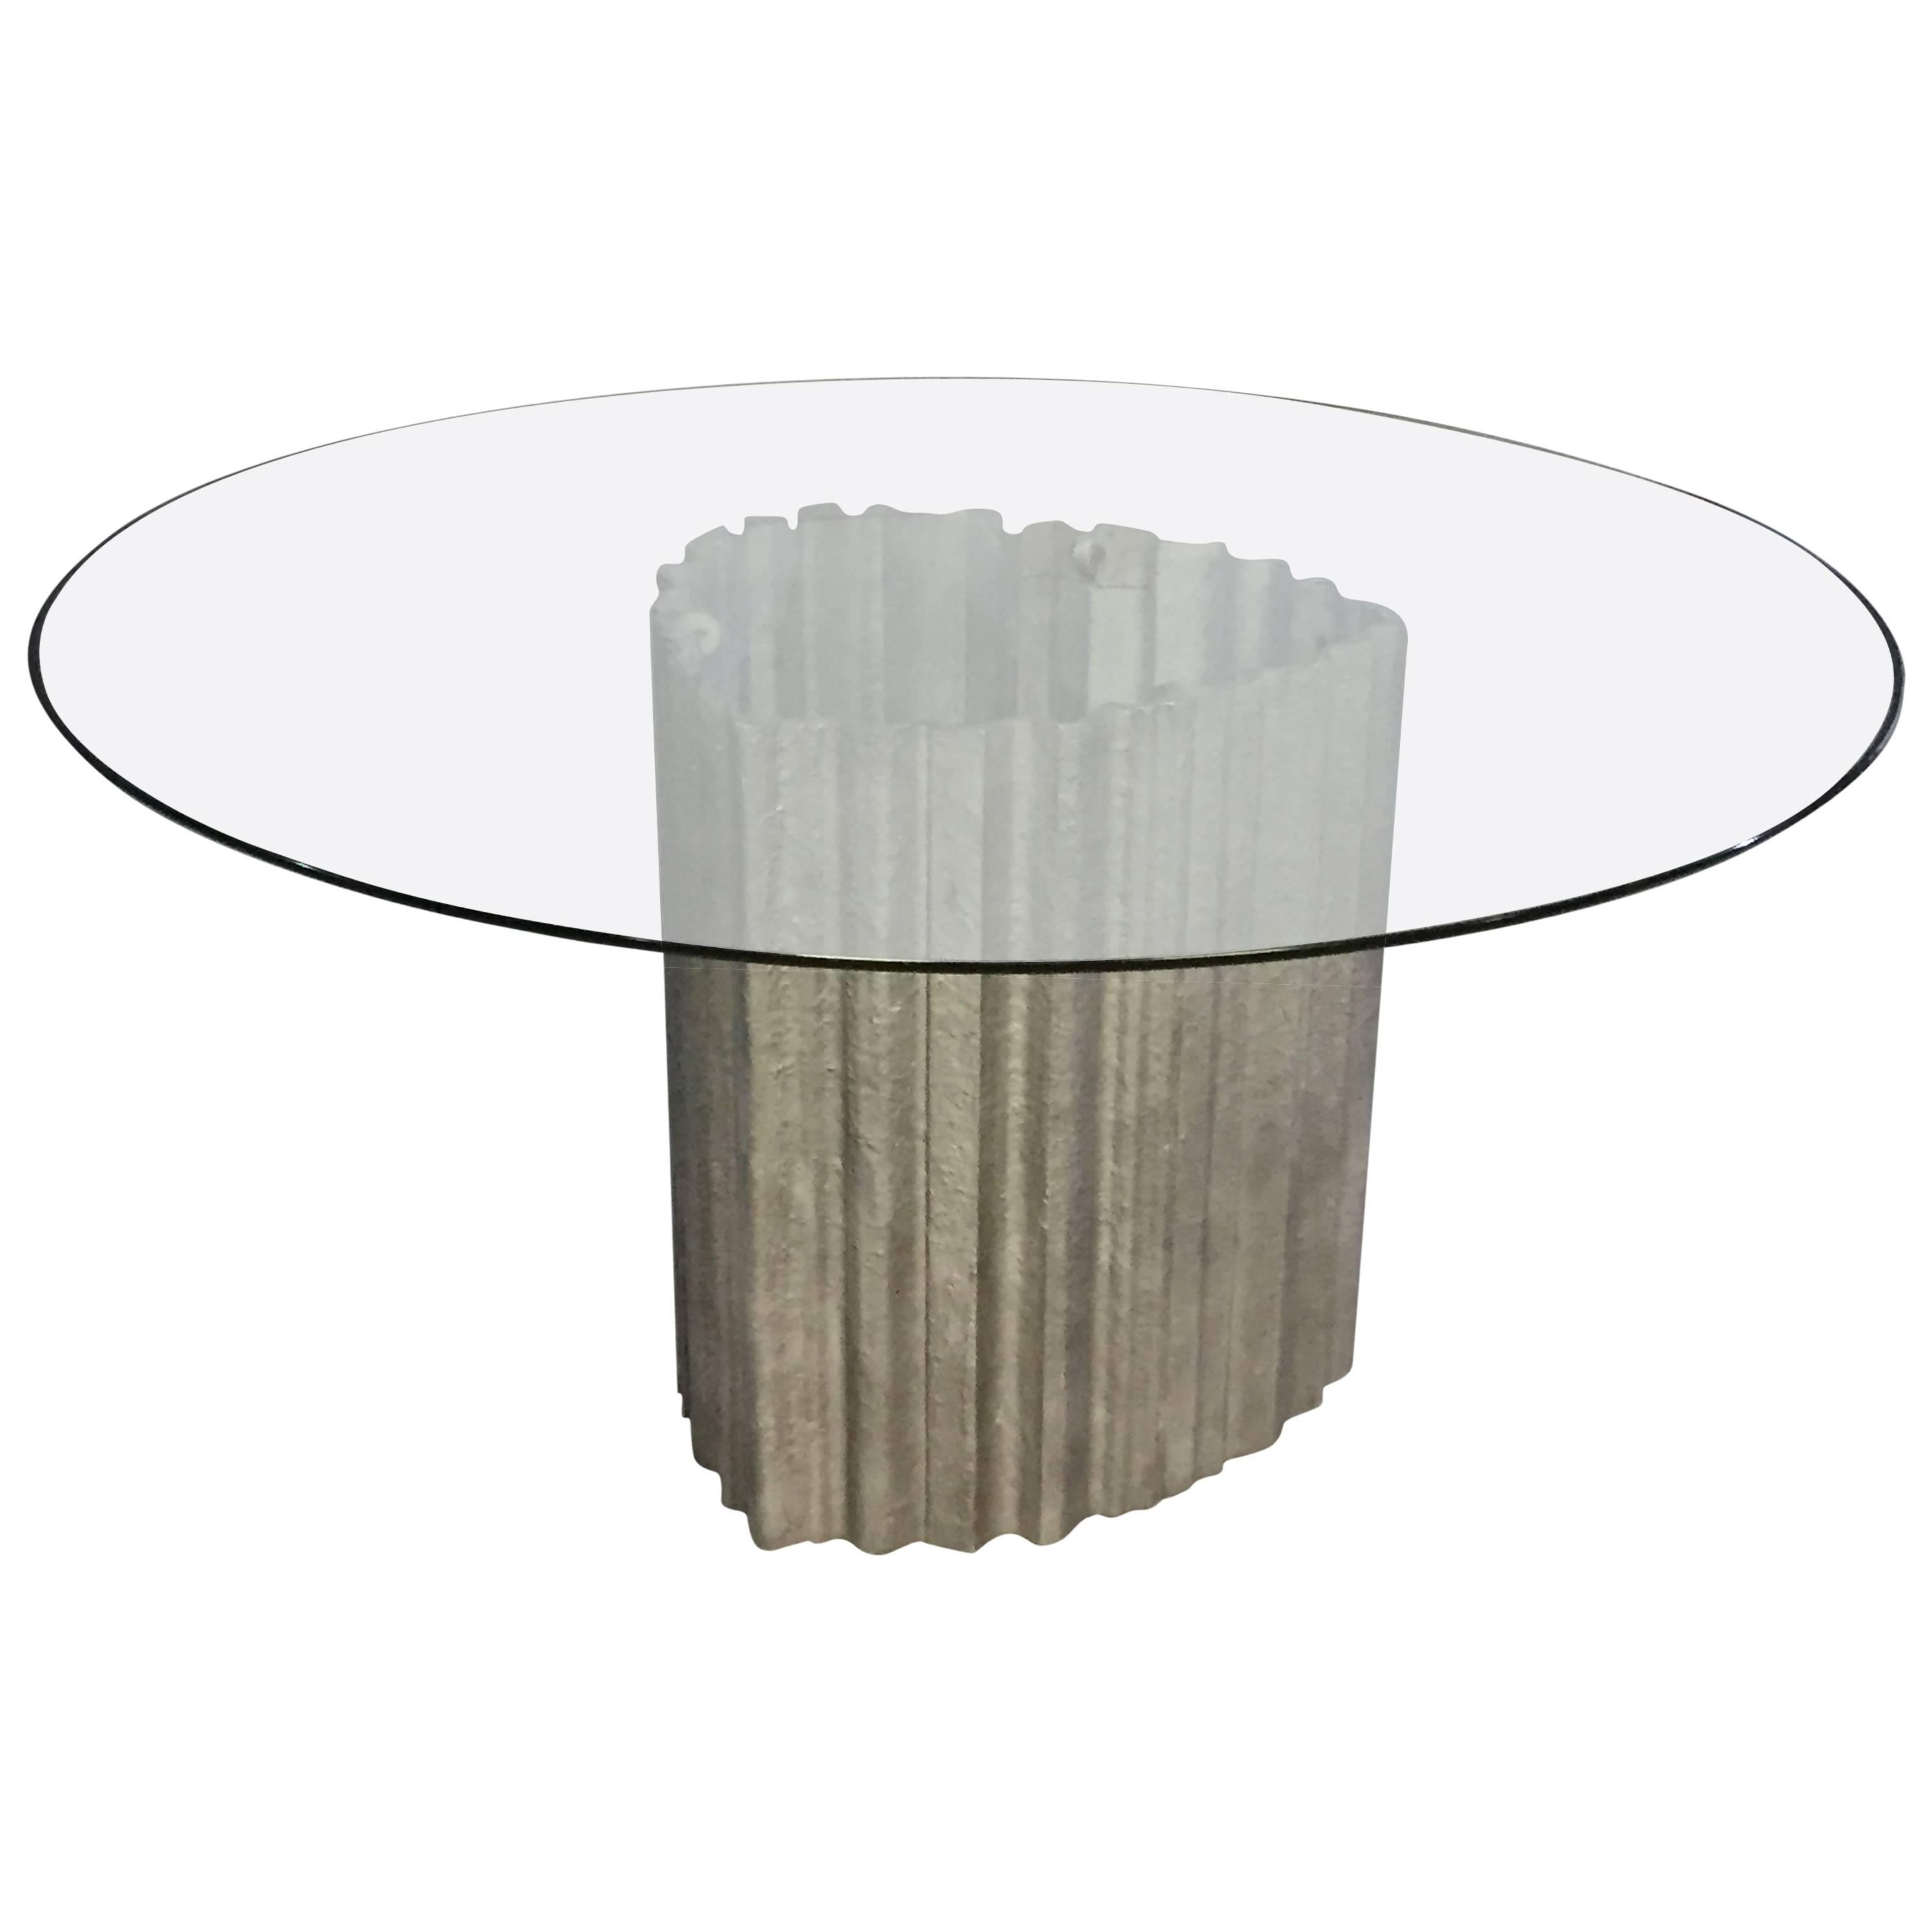 Chic Brutulist Dining/Center Table by Max Papiri